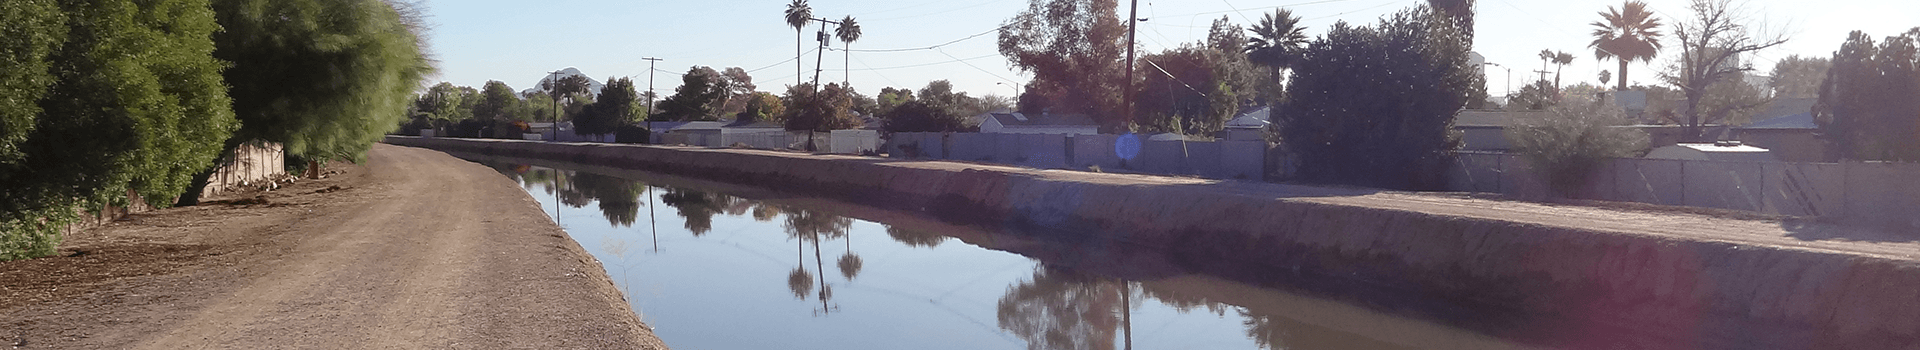  [KTAR] Phoenix-area canals to be transformed in ‘Grand Canalscape’ project